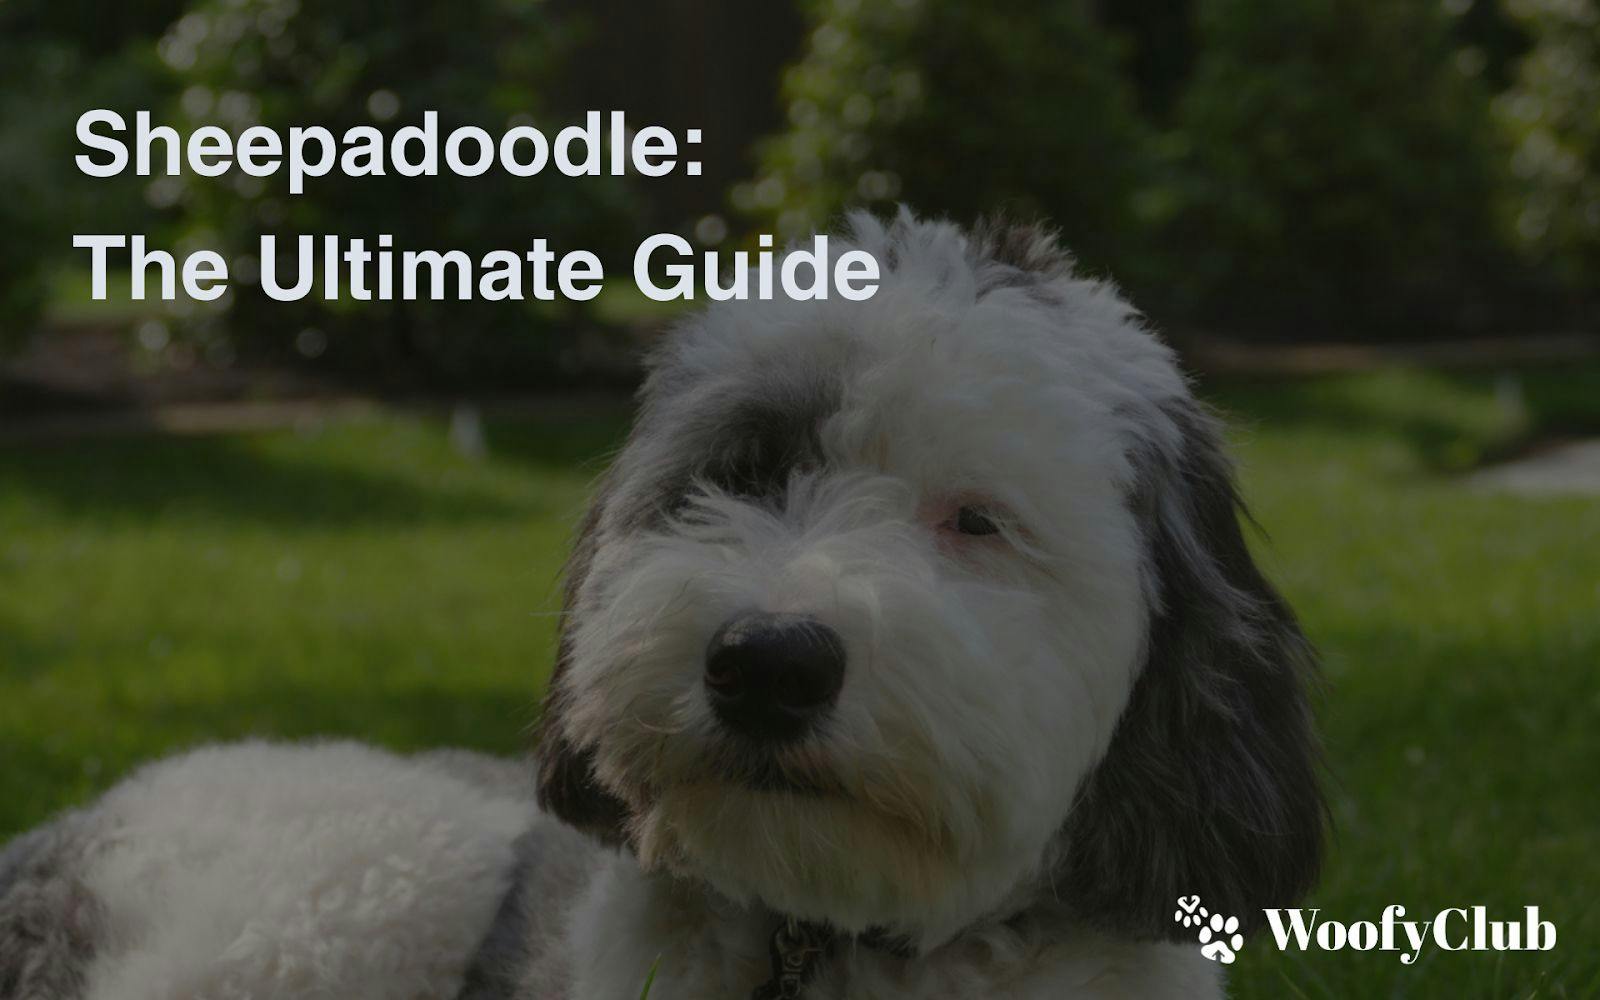 Sheepadoodle: The Ultimate Guide